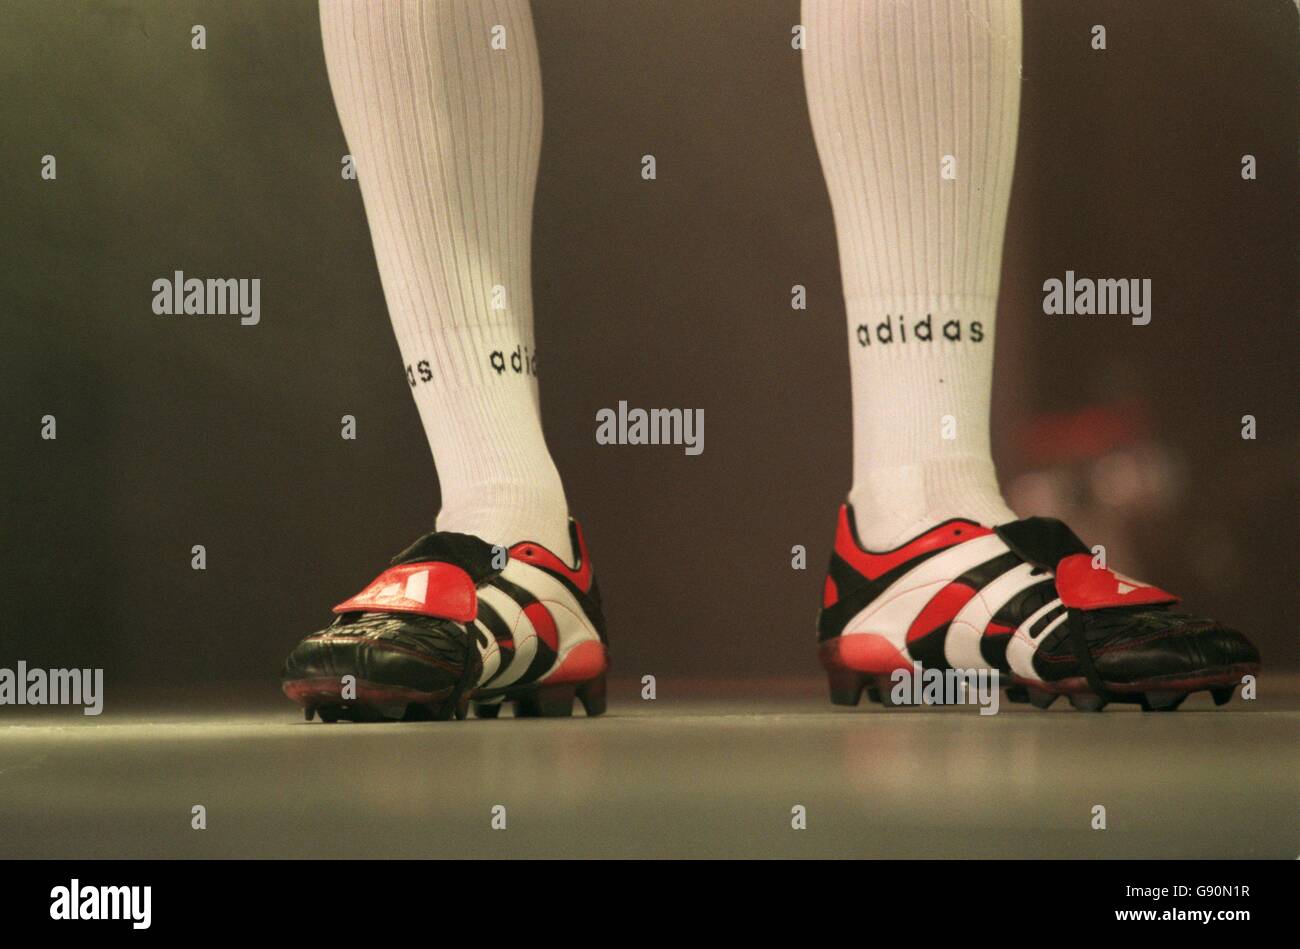 Soccer - David Beckham Signs a Boot Contract With Adidas Stock Photo - Alamy